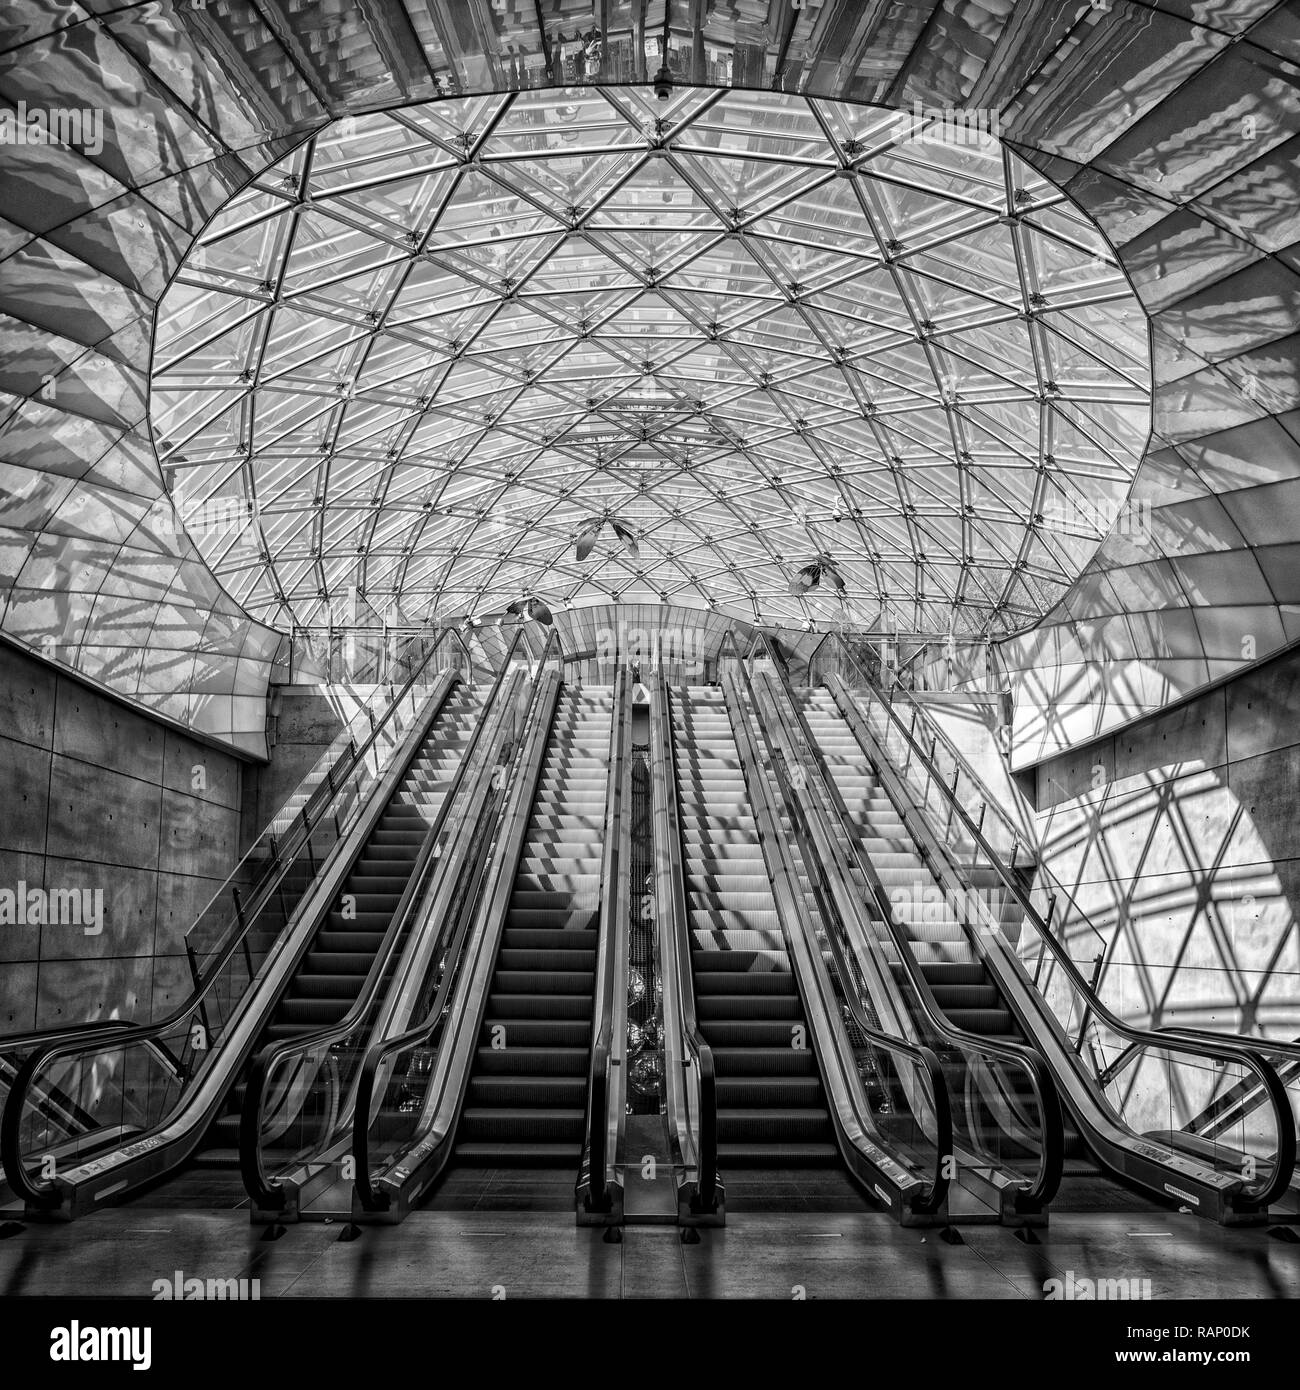 A fine art edit of the escalators at triangeln station in Malmo, Sweden. Stock Photo